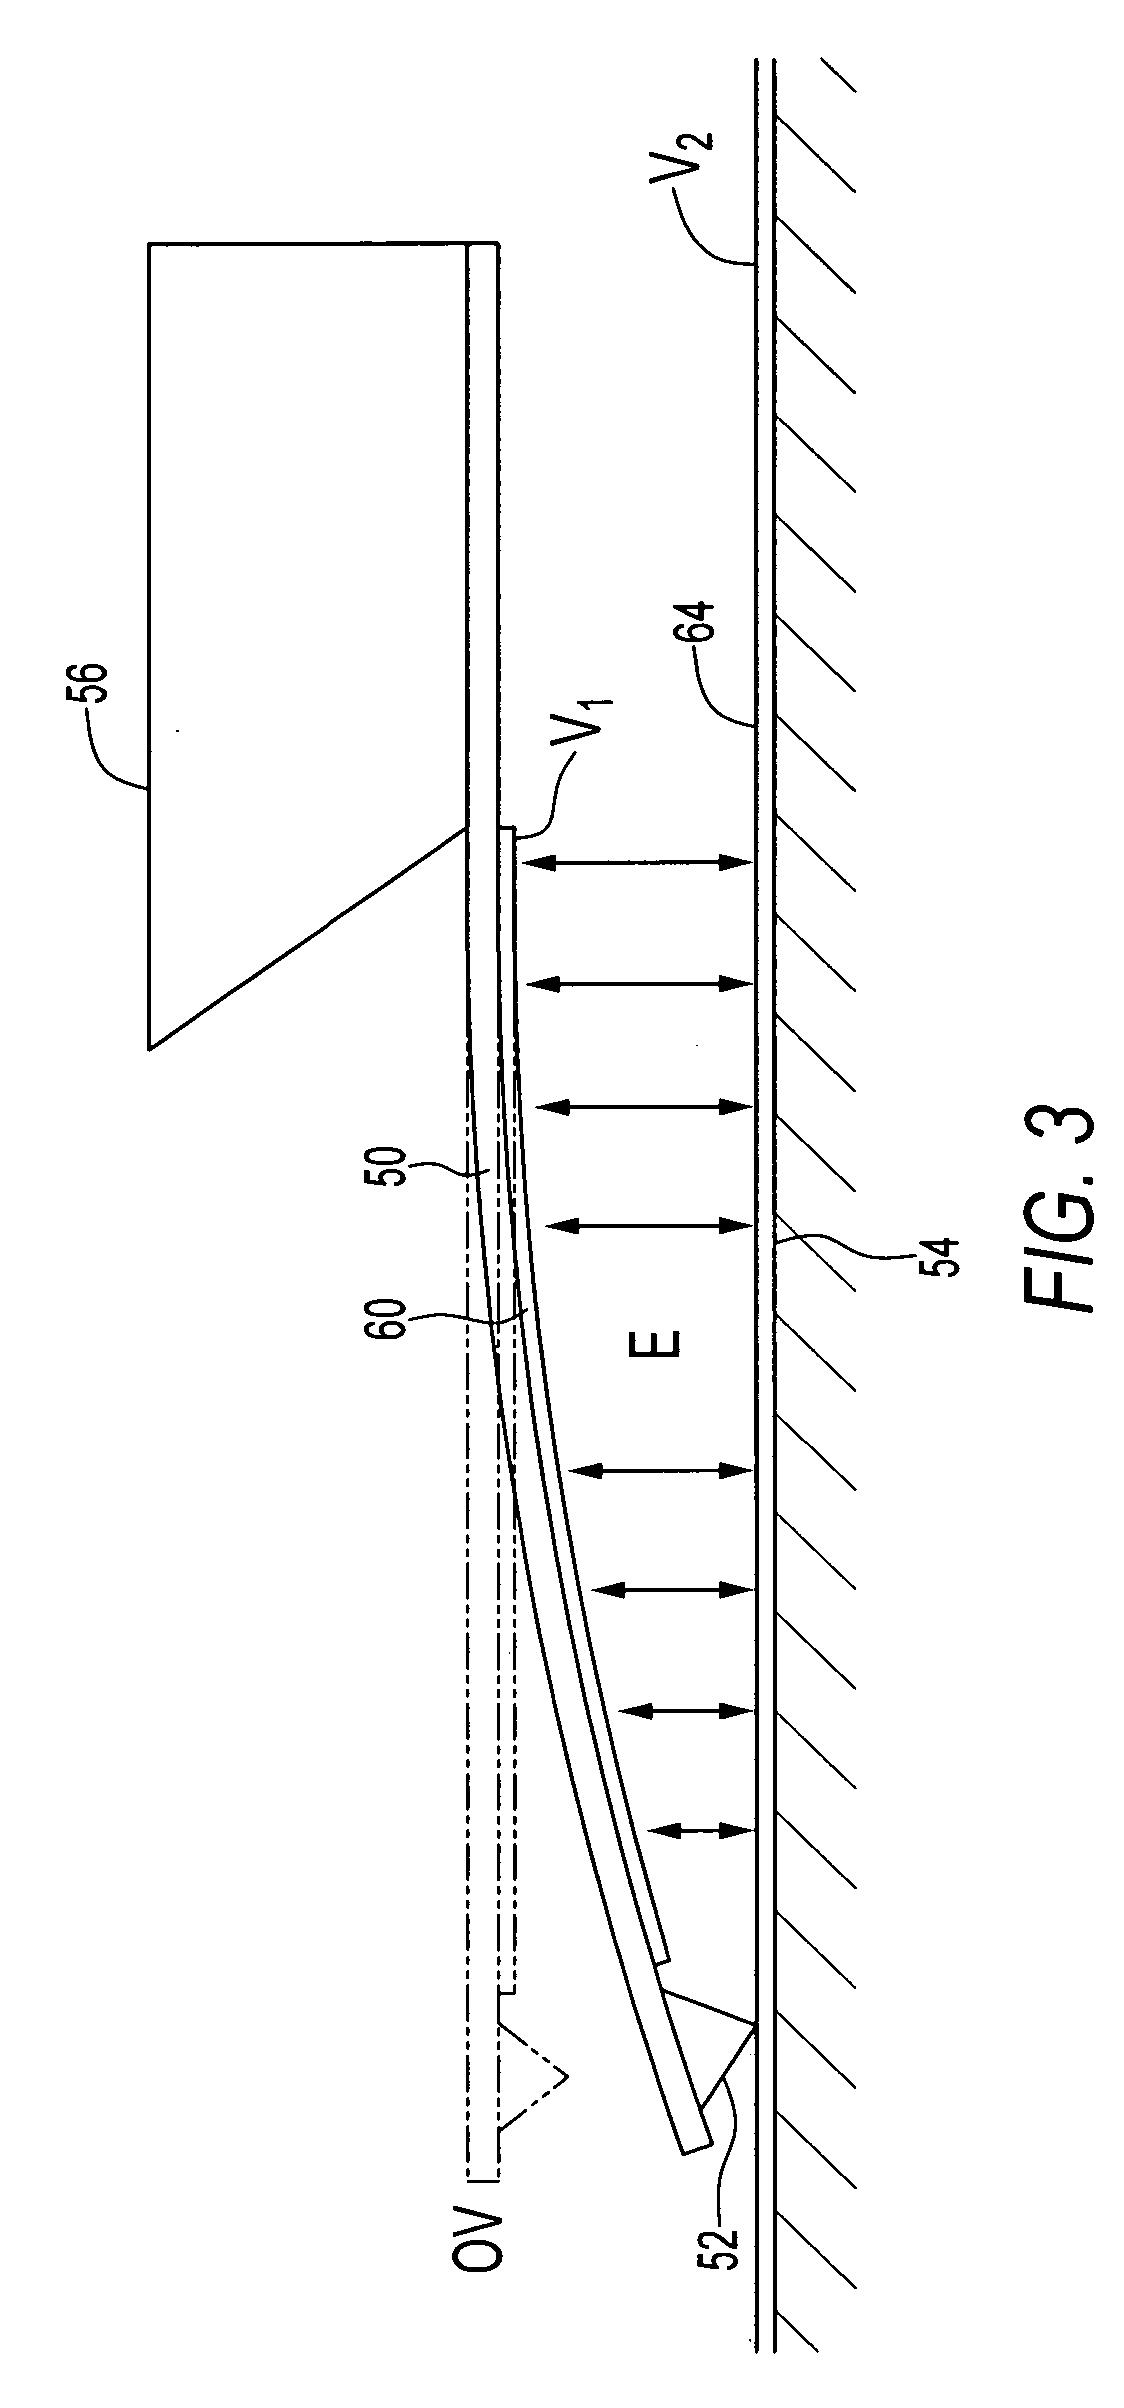 Electrostatic nanolithography probe actuation device and method